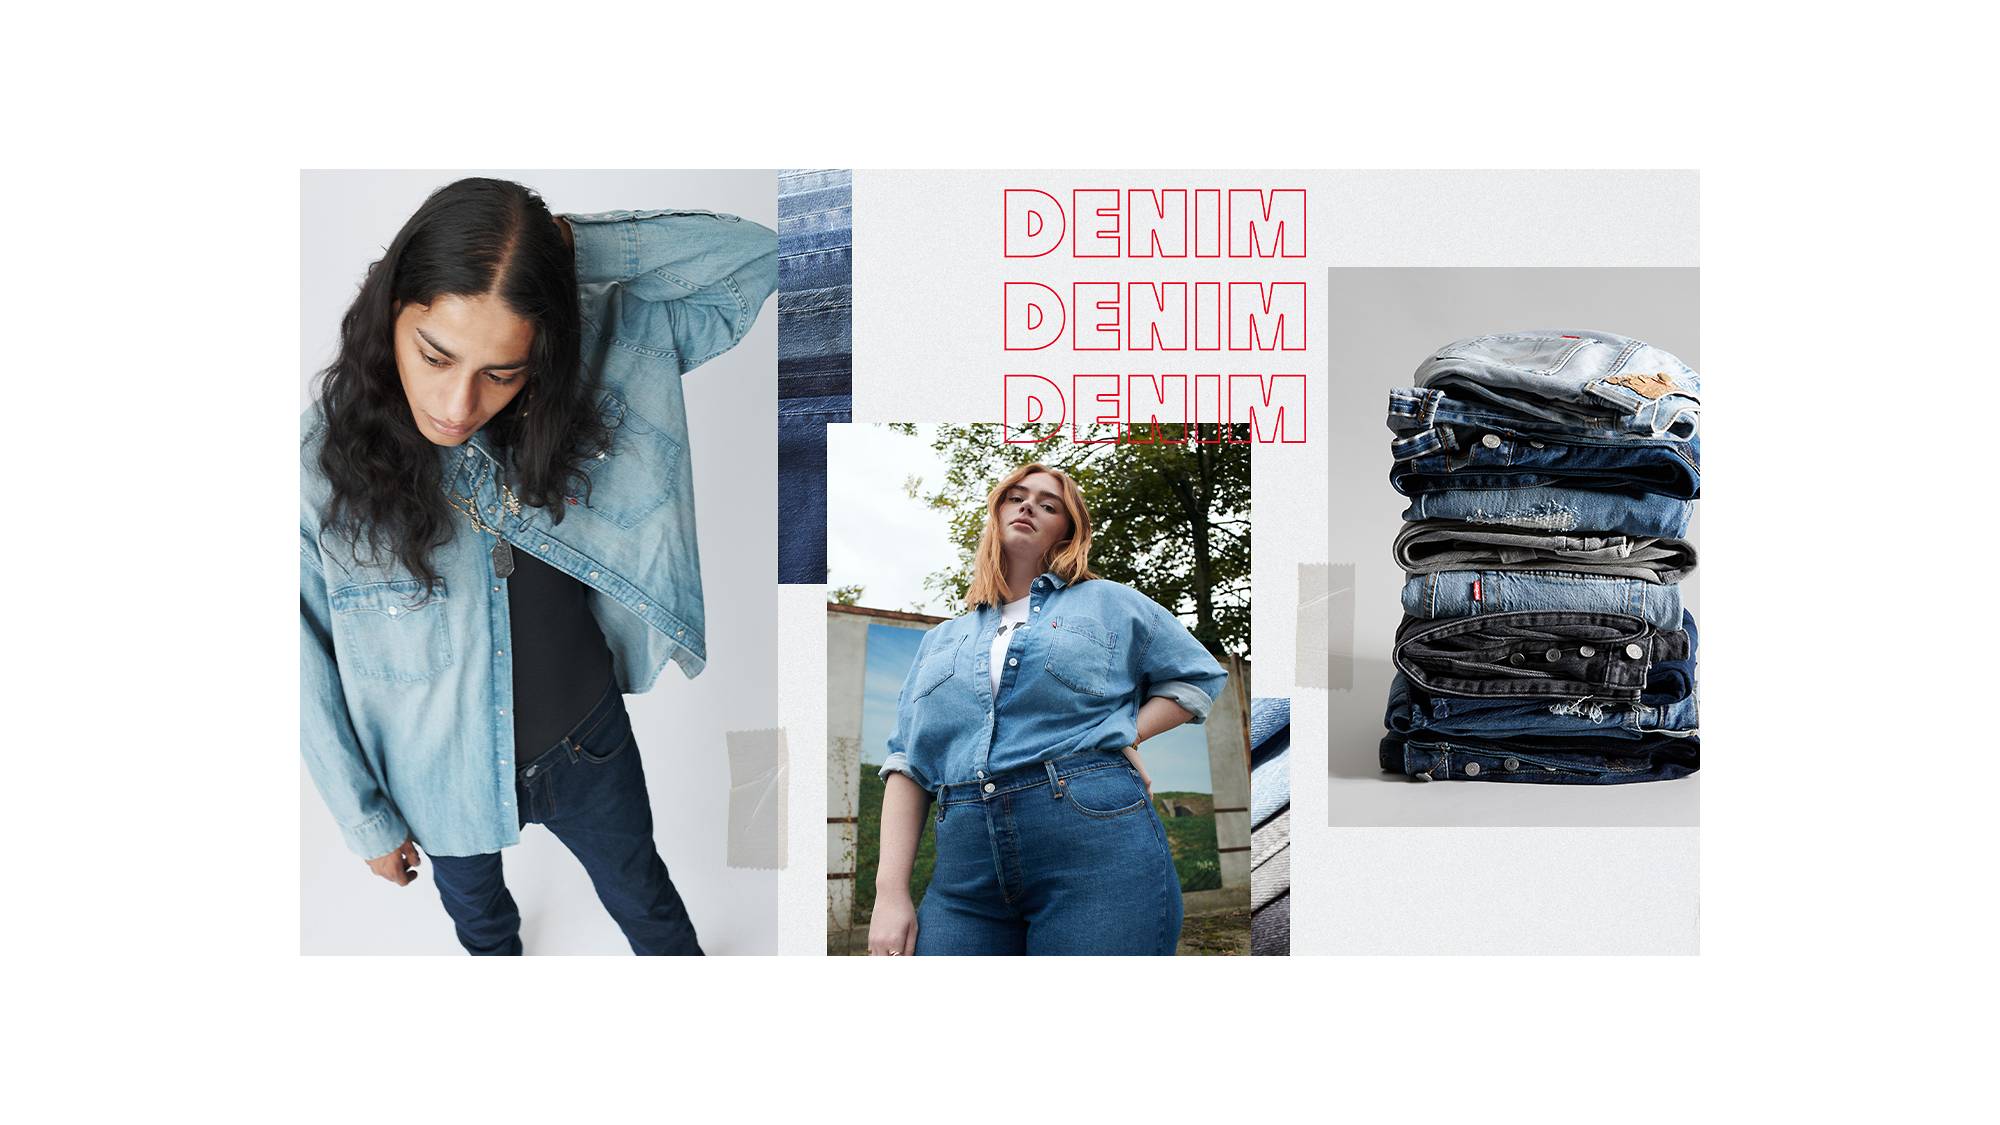 Mix a sophisticated jacket with '80s-inspired denim